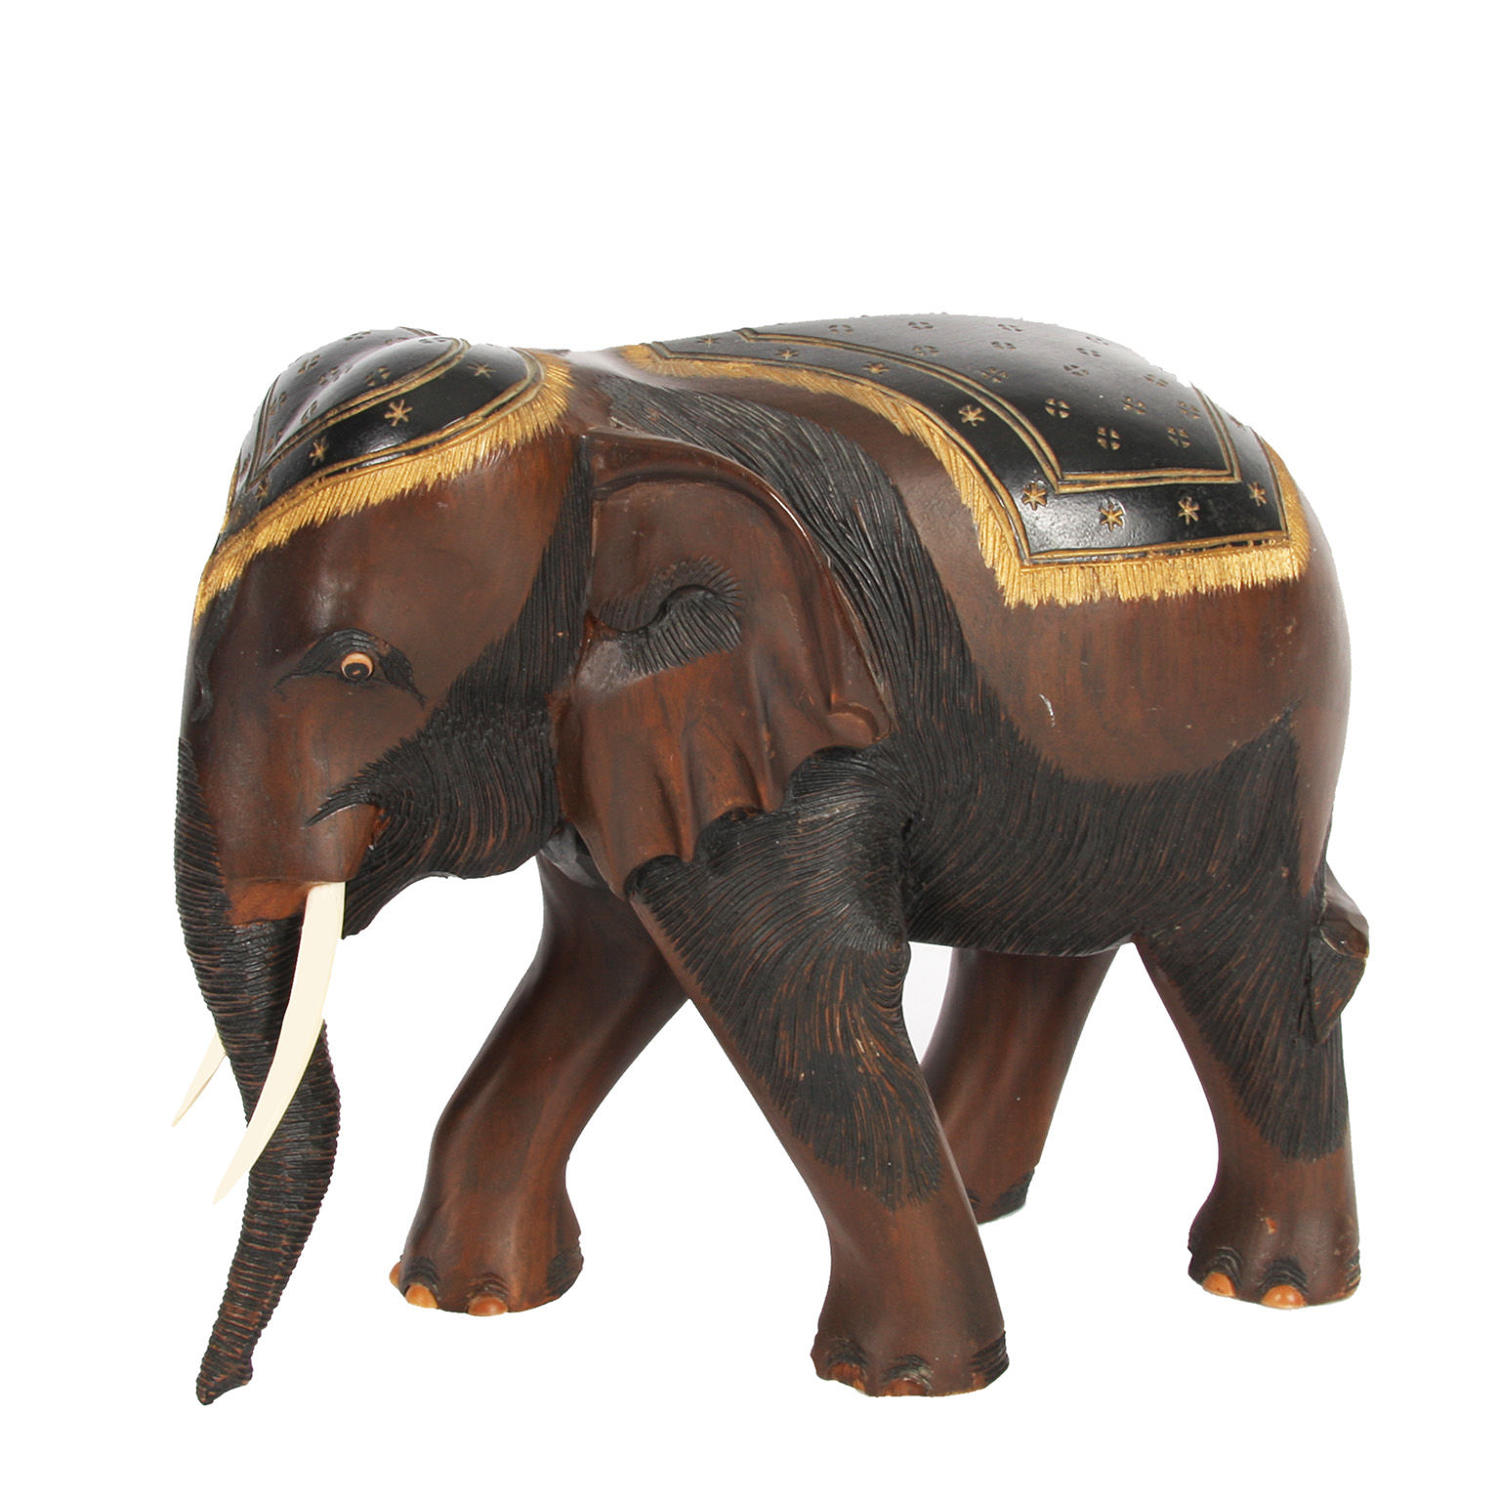 Carved Wooden Elephant with Painted Details